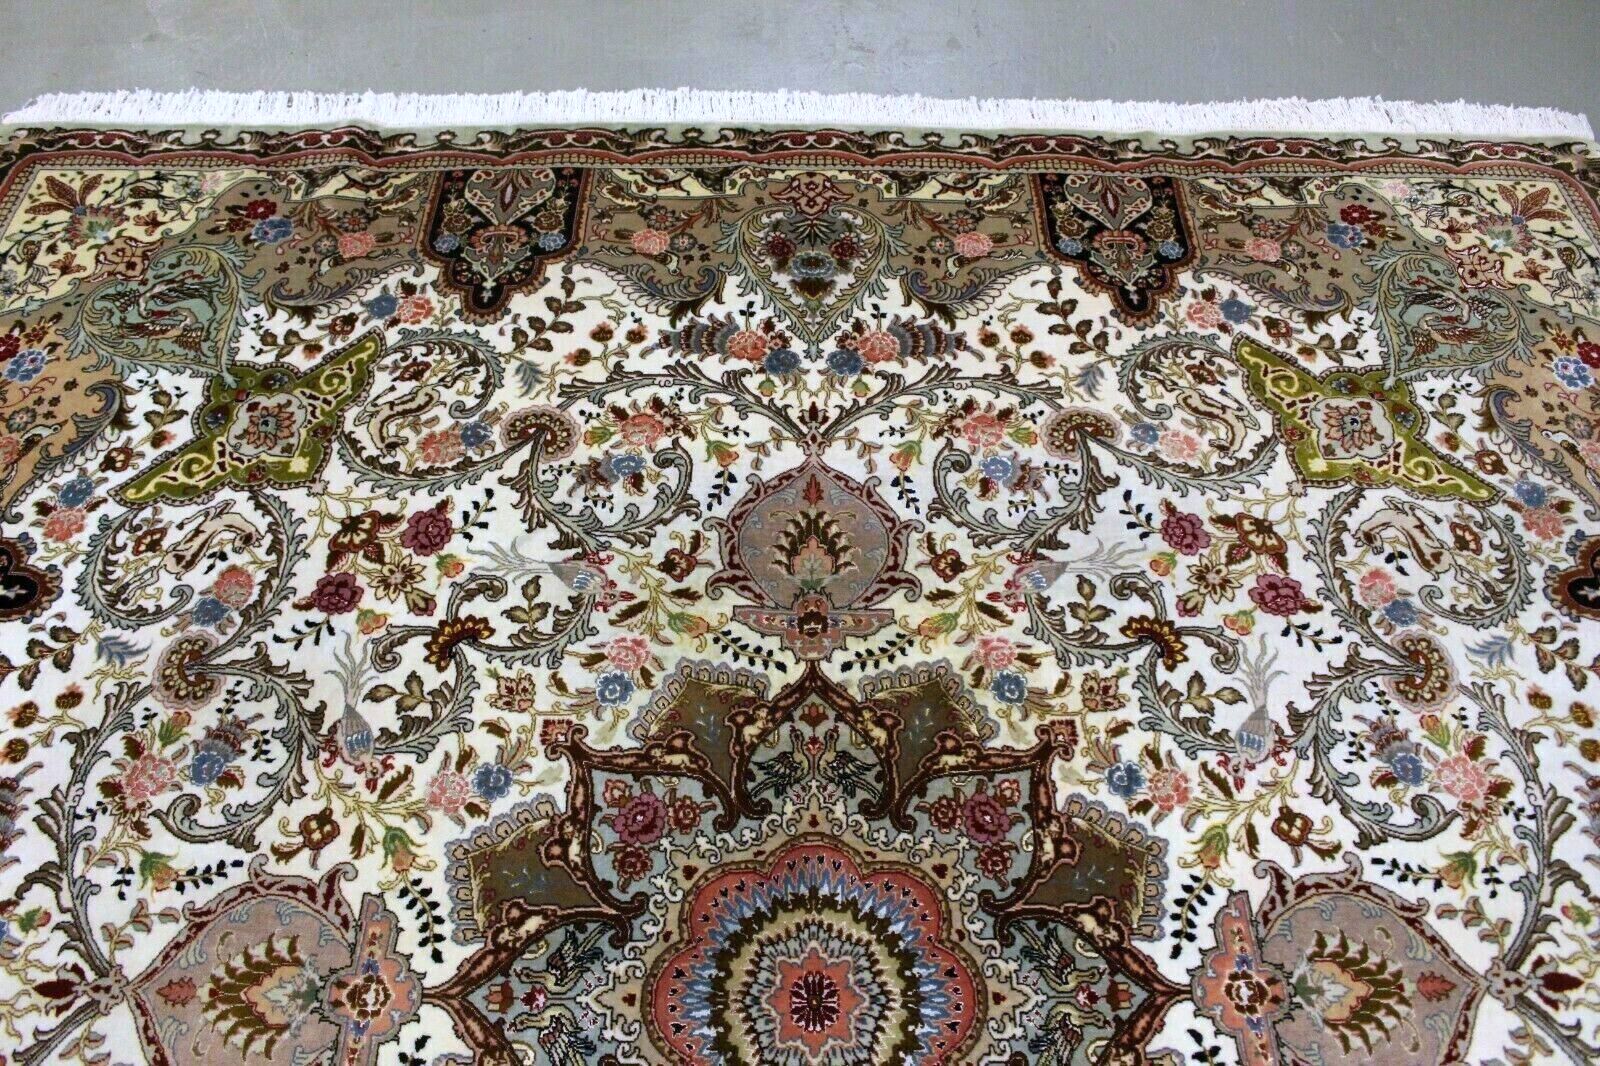 Close-up of central medallion on Handmade Vintage Persian Tabriz Rug - Detailed view highlighting the intricate floral motifs and geometric shapes.